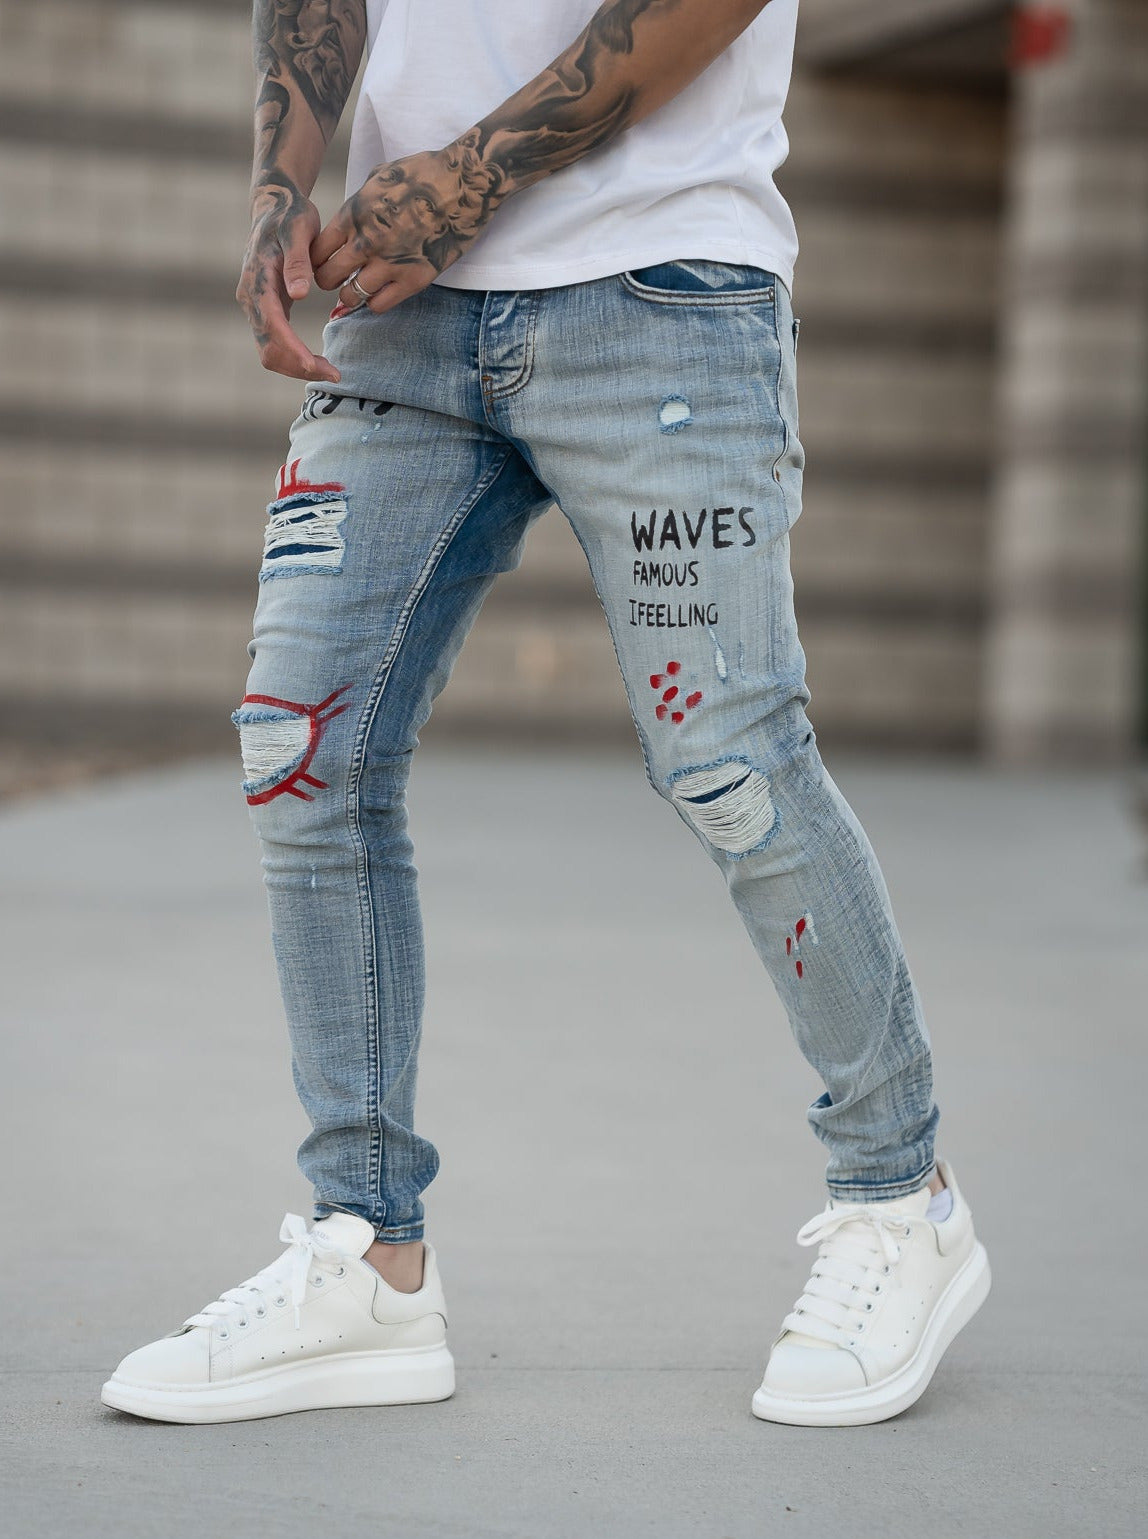 Buy Mens Jogging Trousers for Old Men Baggy Jeans Mens 90S Hip Hop Men's  Casual Cotton Straight Ripped Hole Trousers Jeans Pants Full Length Pants  Comfy Cotton Denim Jeans Clearance Online at